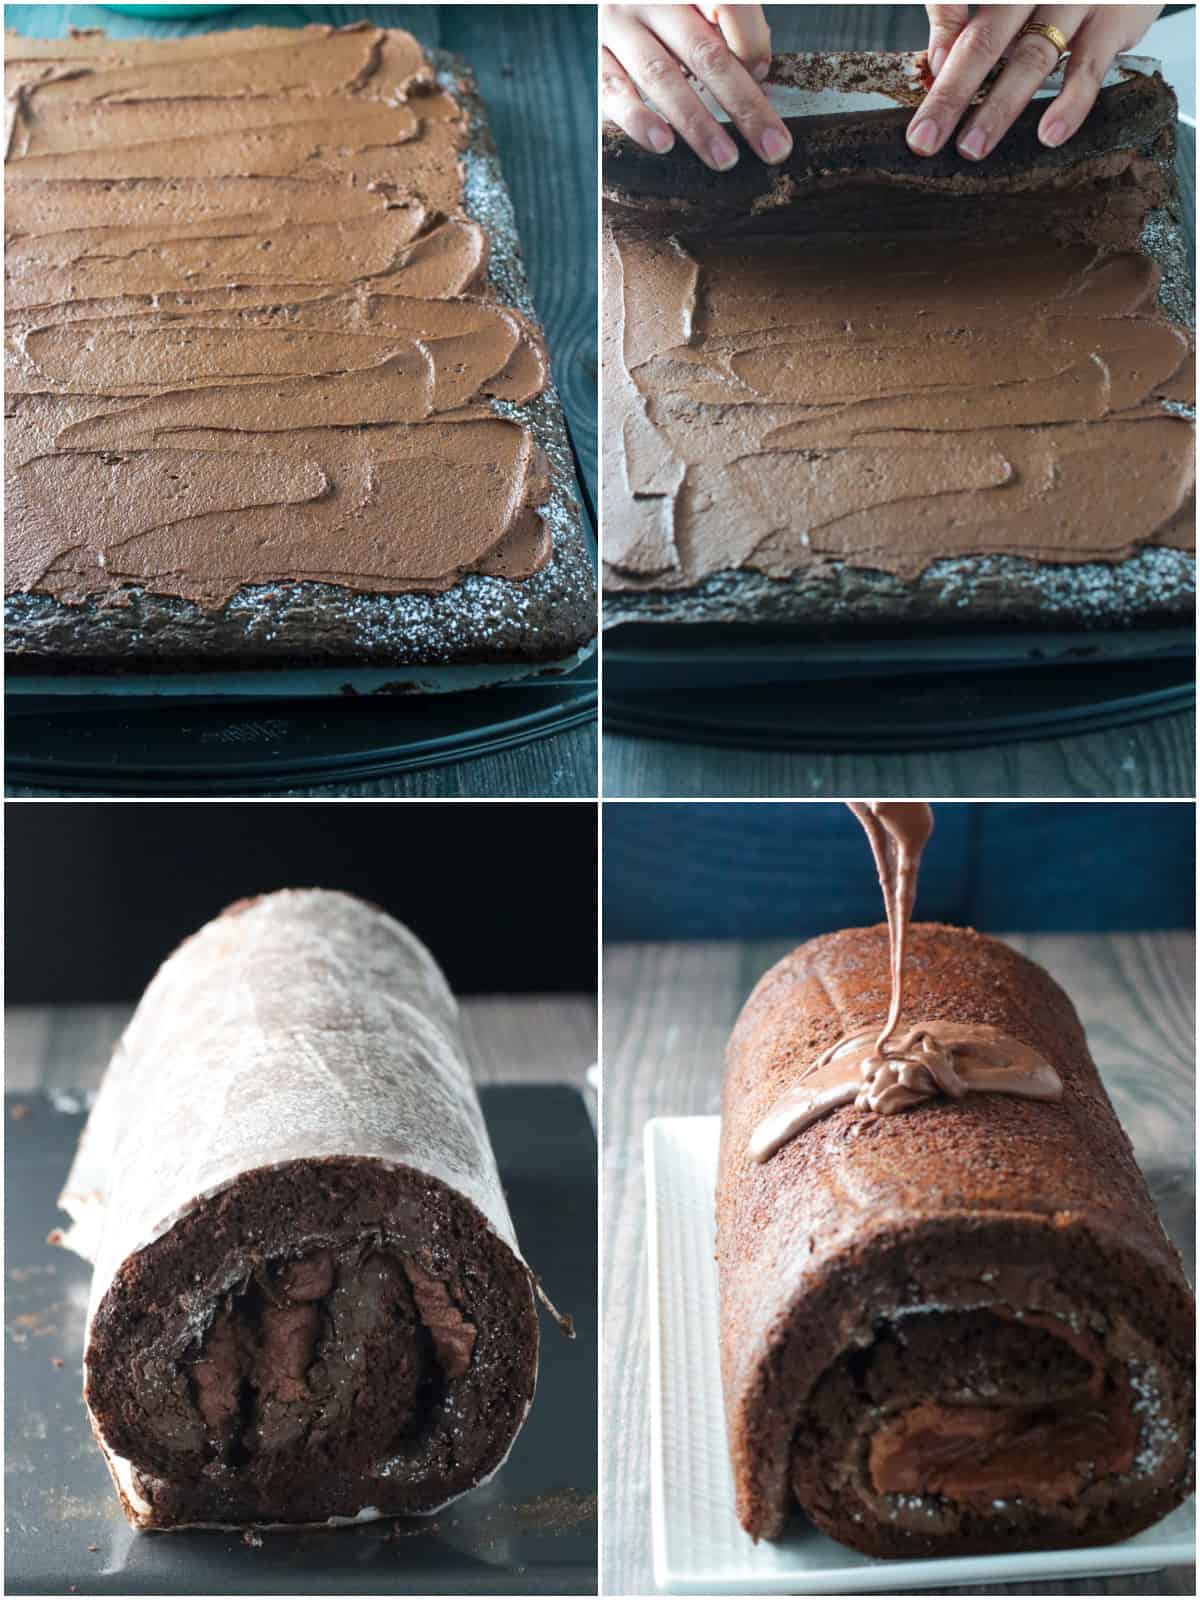 A collage showing the process of rolling a jelly roll cake.